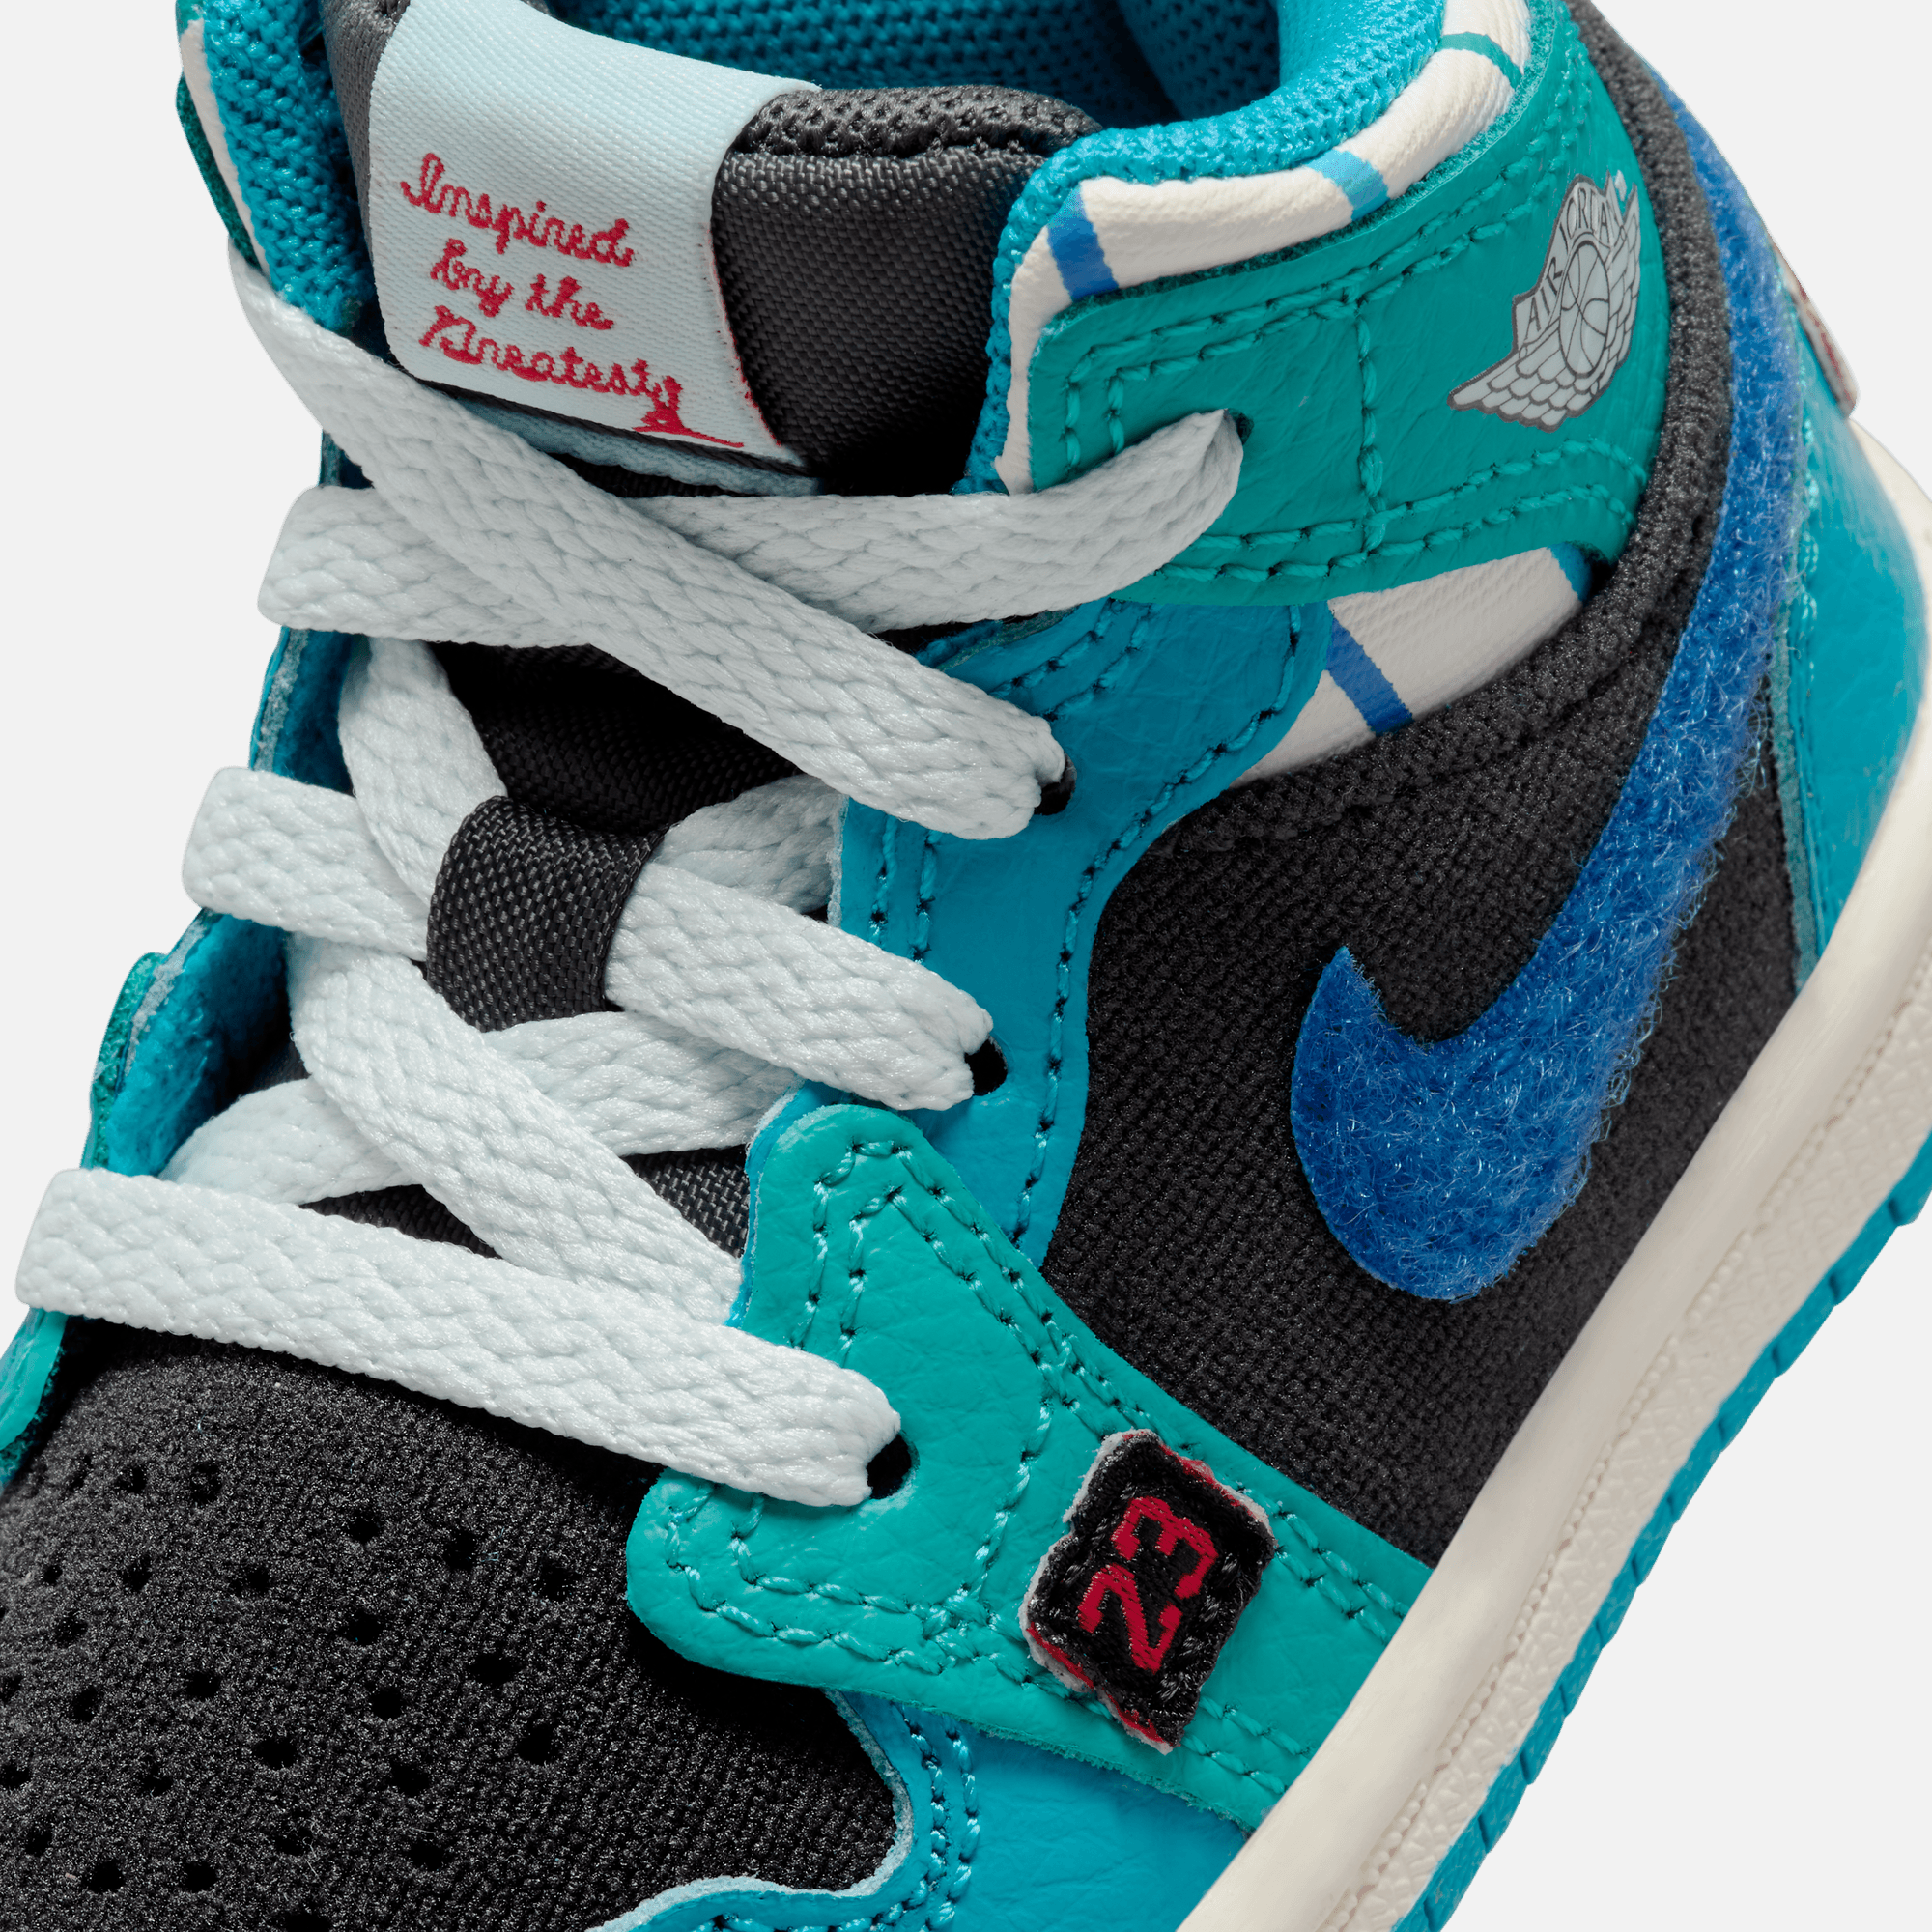 Air Jordan Kids' 1 Mid SS 'Inspired By The Greatest' (TD)